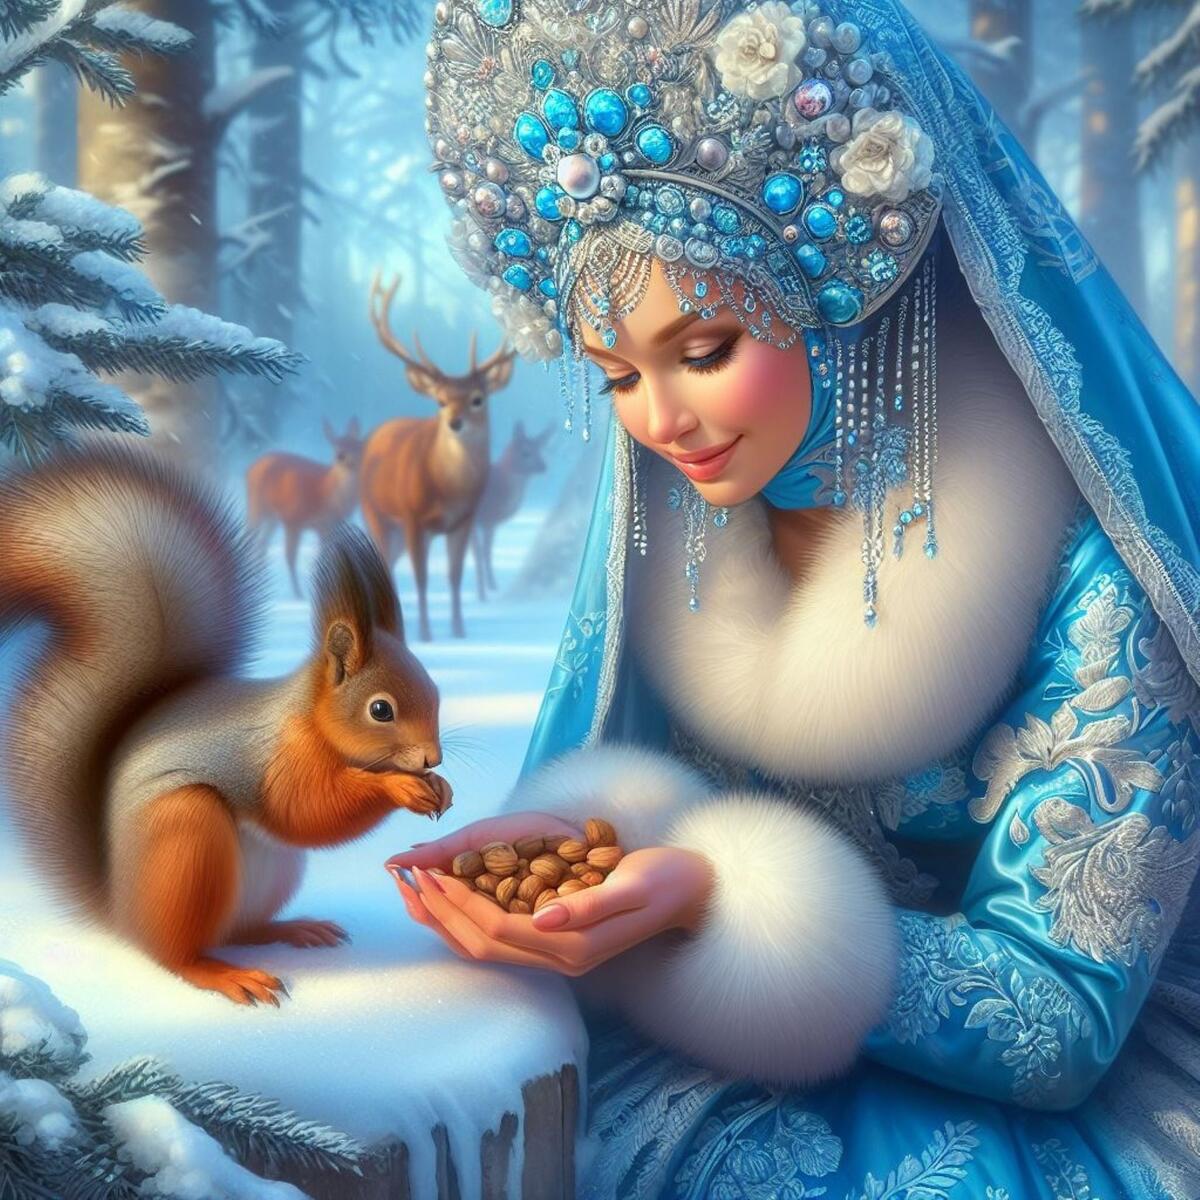 The Snow Maiden feeds a squirrel